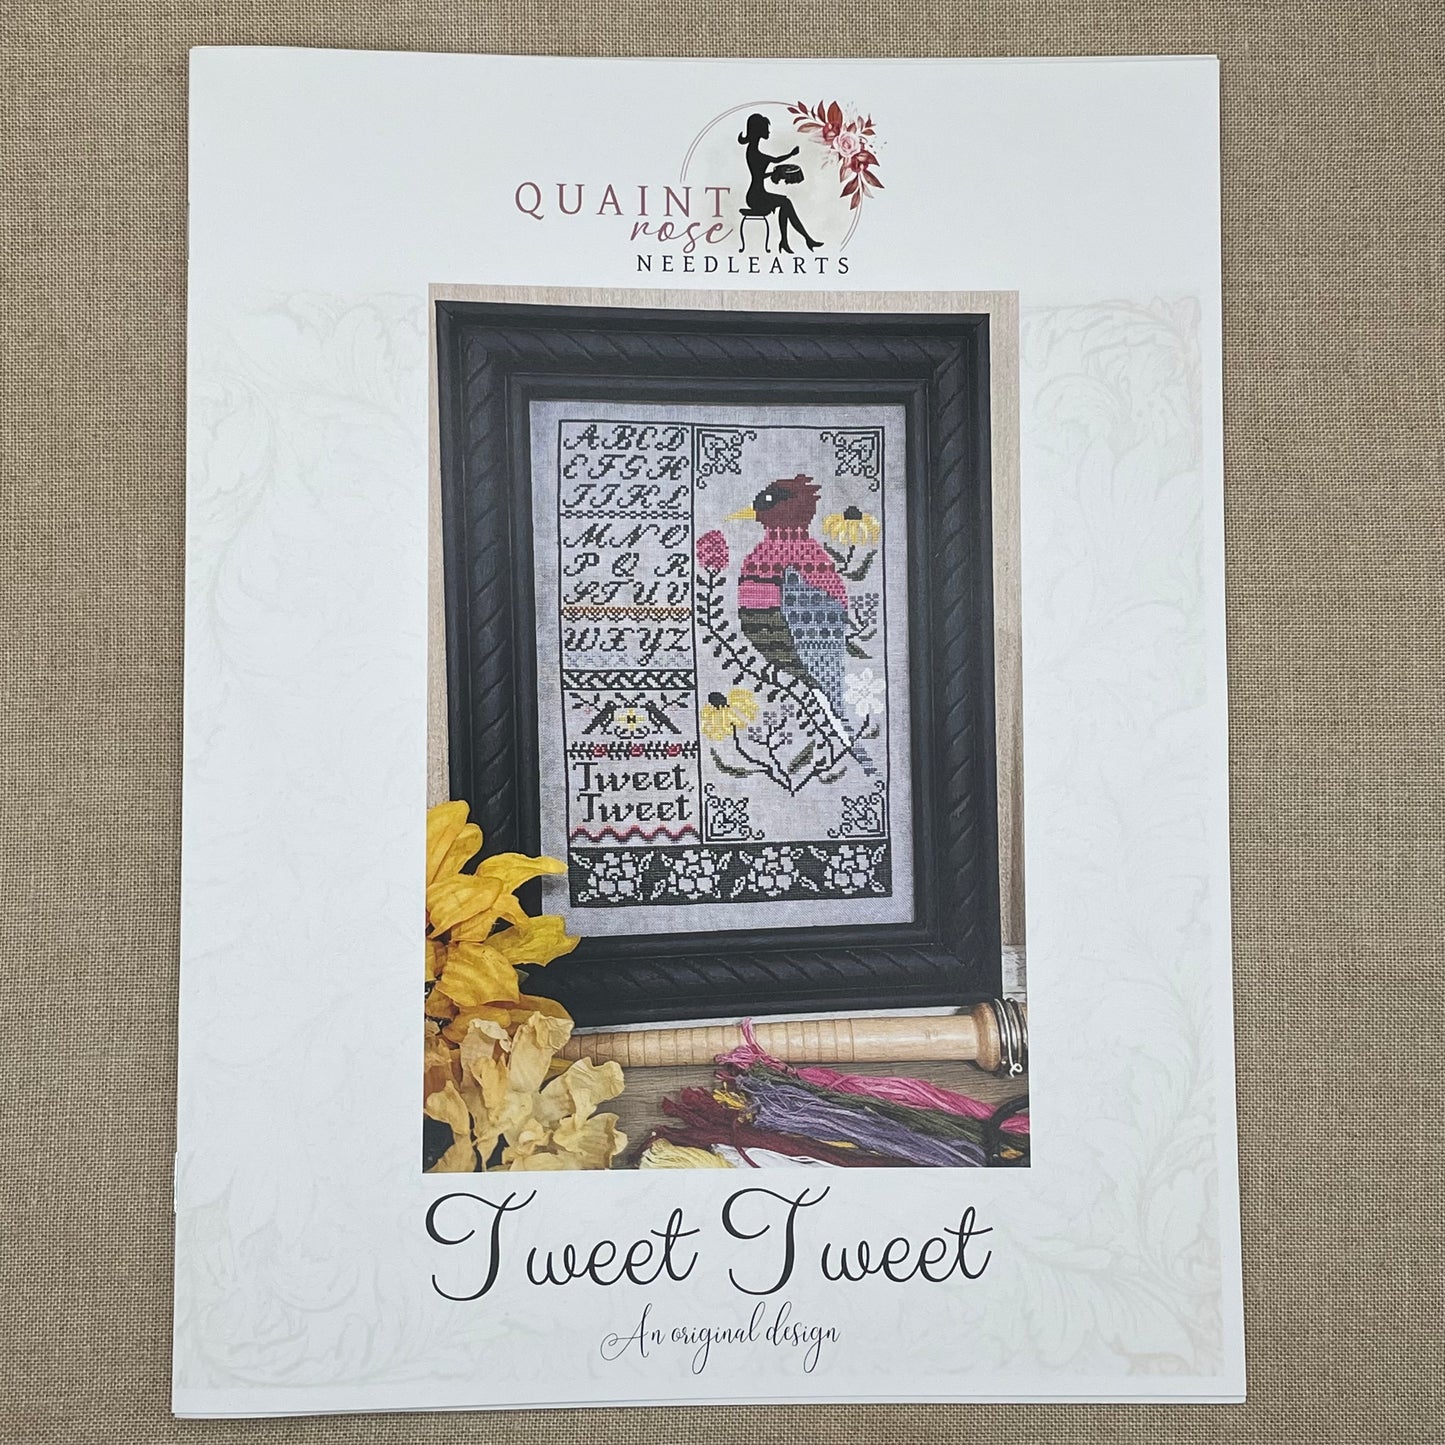 Quaint Rose Needlearts, Roxy Floss Co, and Evertote: Tweet Tweet Full Kit - with White Project Bag Set, Booklet Chart, and Roxy Floss